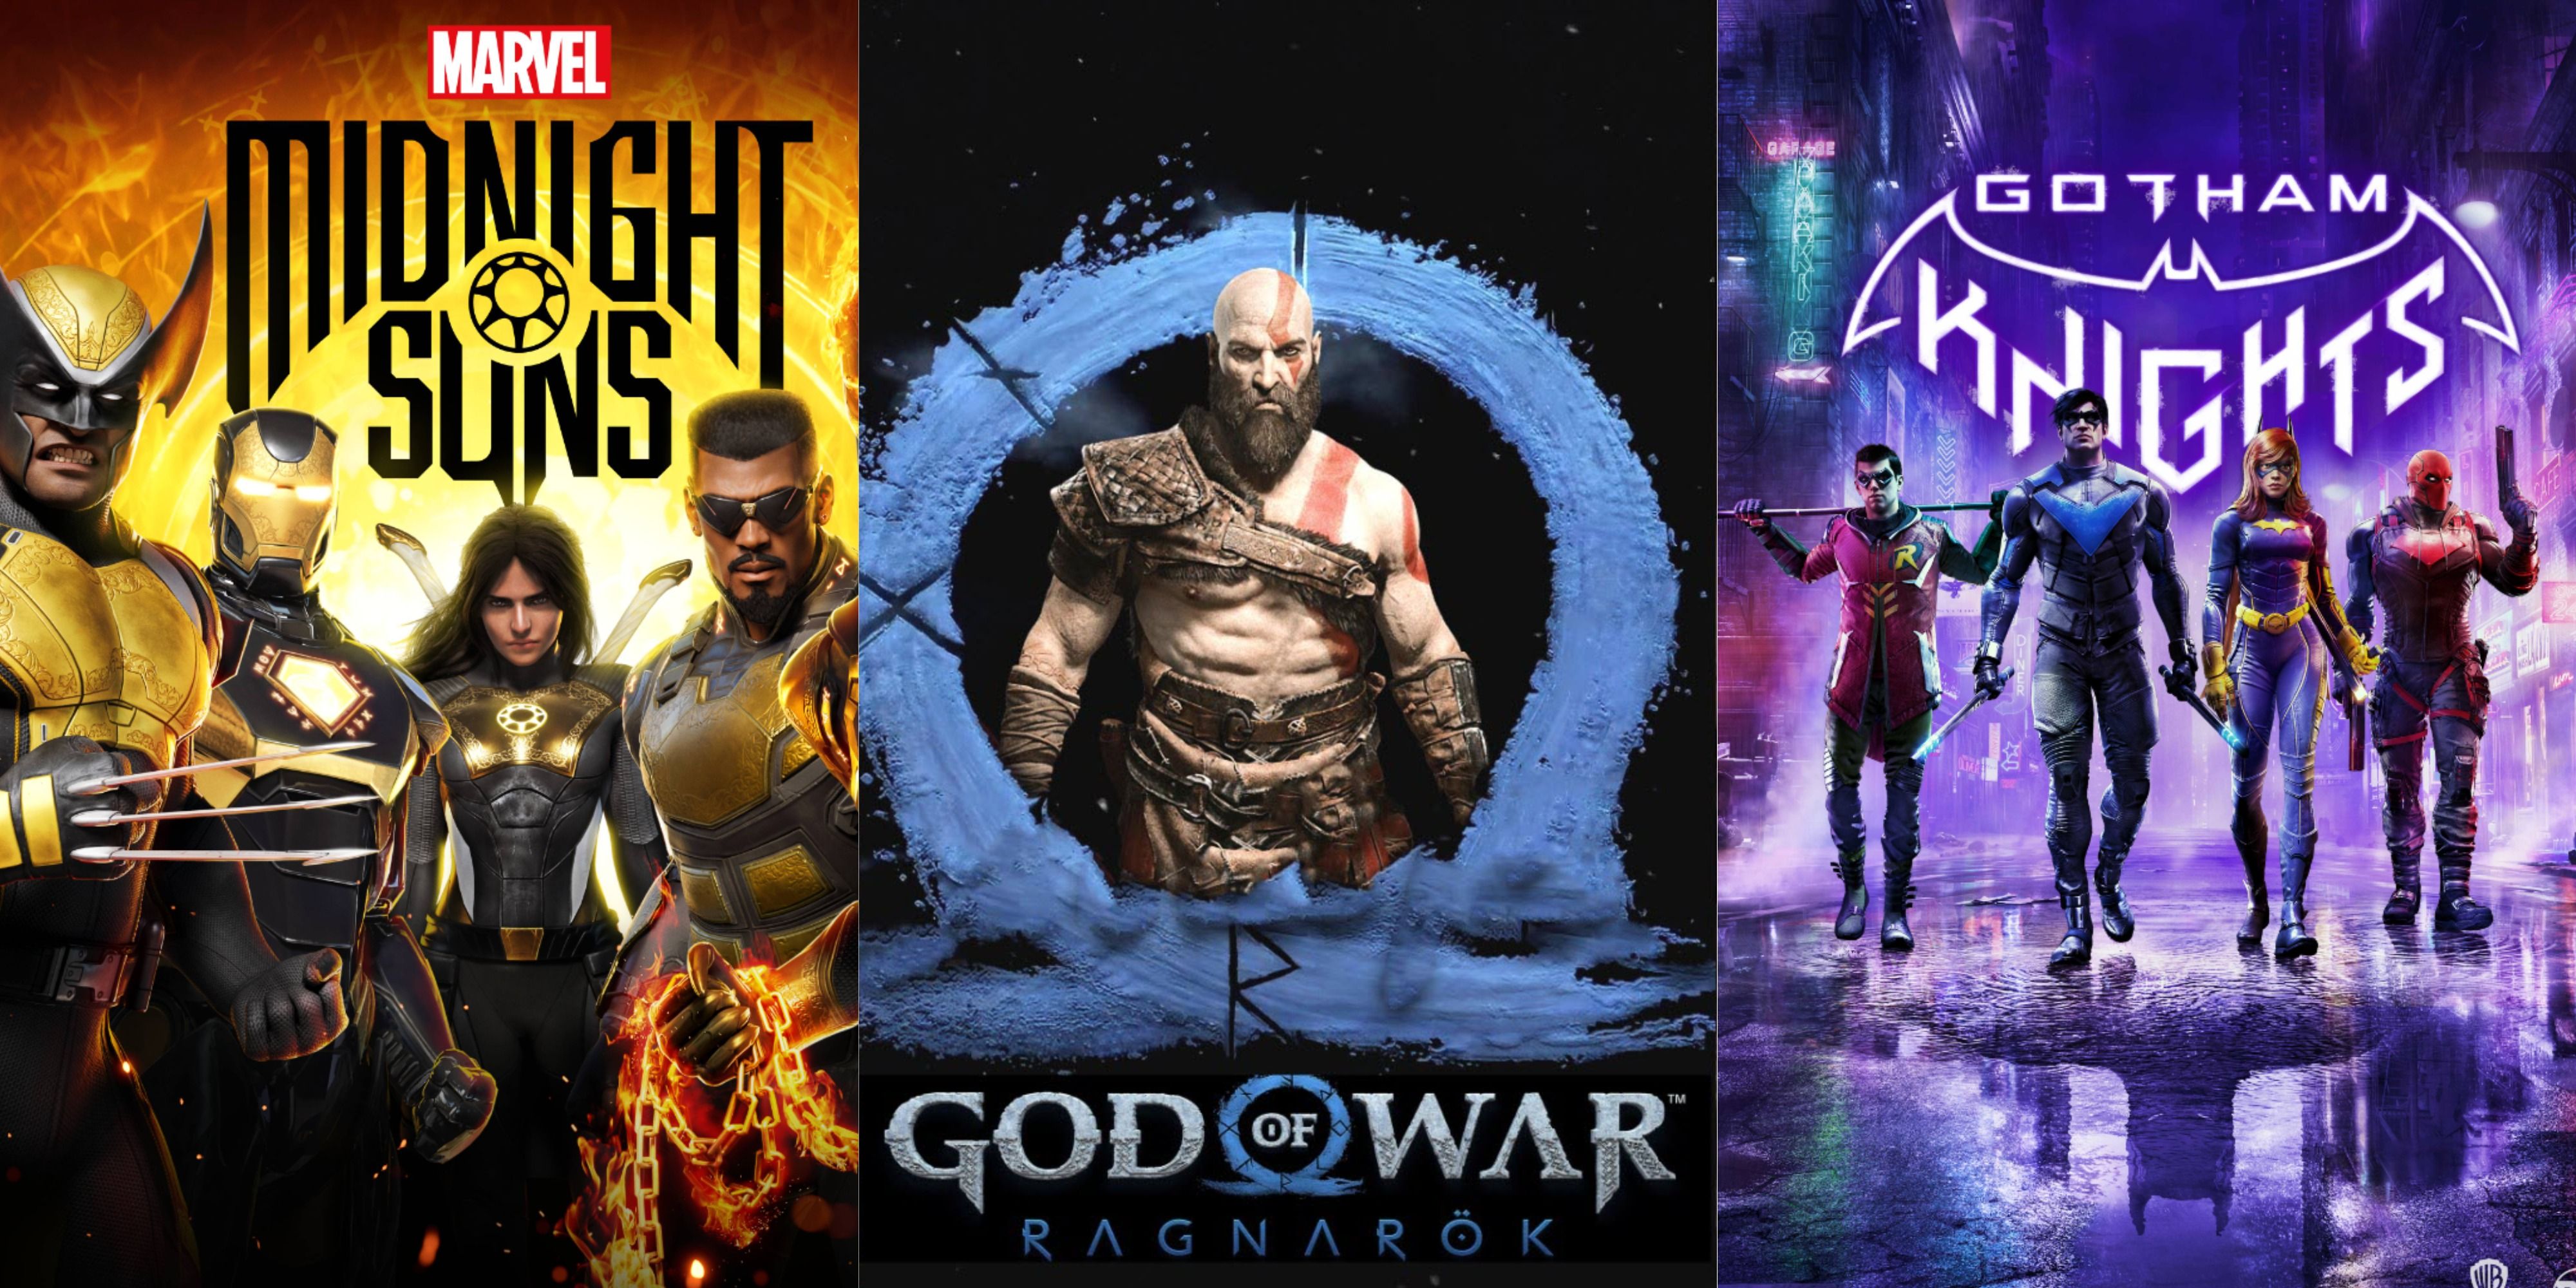 Combined images of Marvel's Midnight Suns, God of War Ragnarok, and Gotham Knights